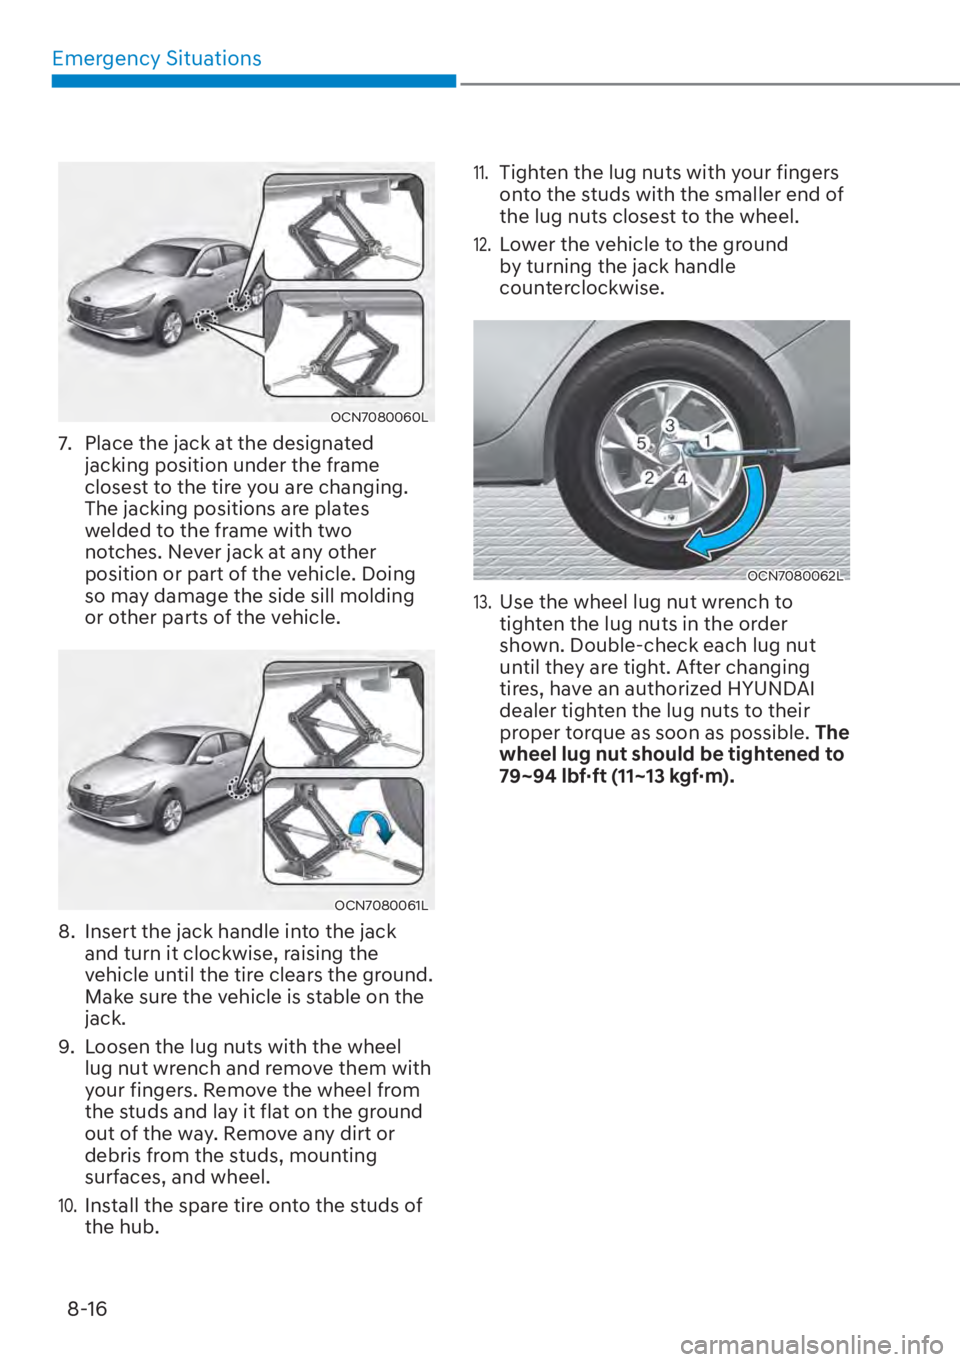 HYUNDAI ELANTRA 2023  Owners Manual Emergency Situations8-16
OCN7080060L
7.  Place the jack at the designated  jacking position under the frame 
closest to the tire you are changing. 
The jacking positions are plates 
welded to the fram